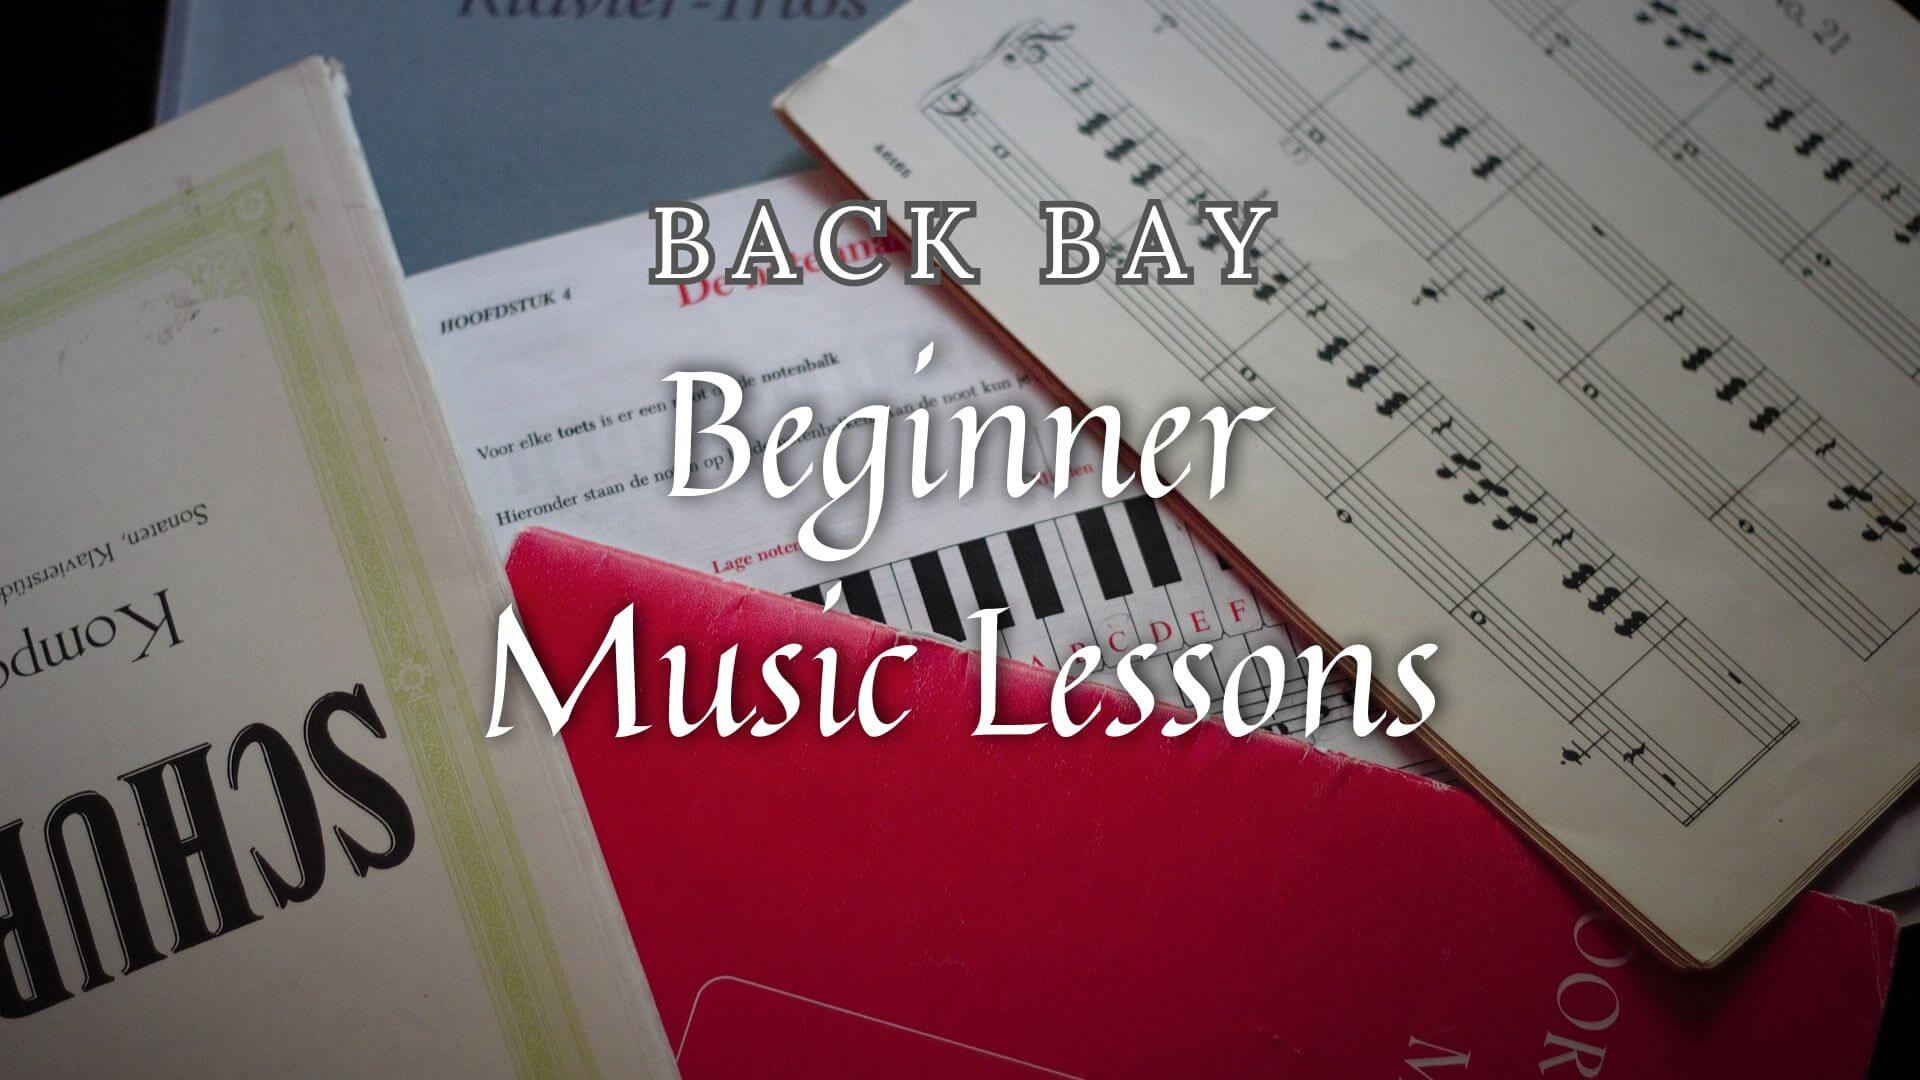 Music Classes for Beginners in Back Bay, Massachusetts: Discover the Joy of Music at Musicians Playground